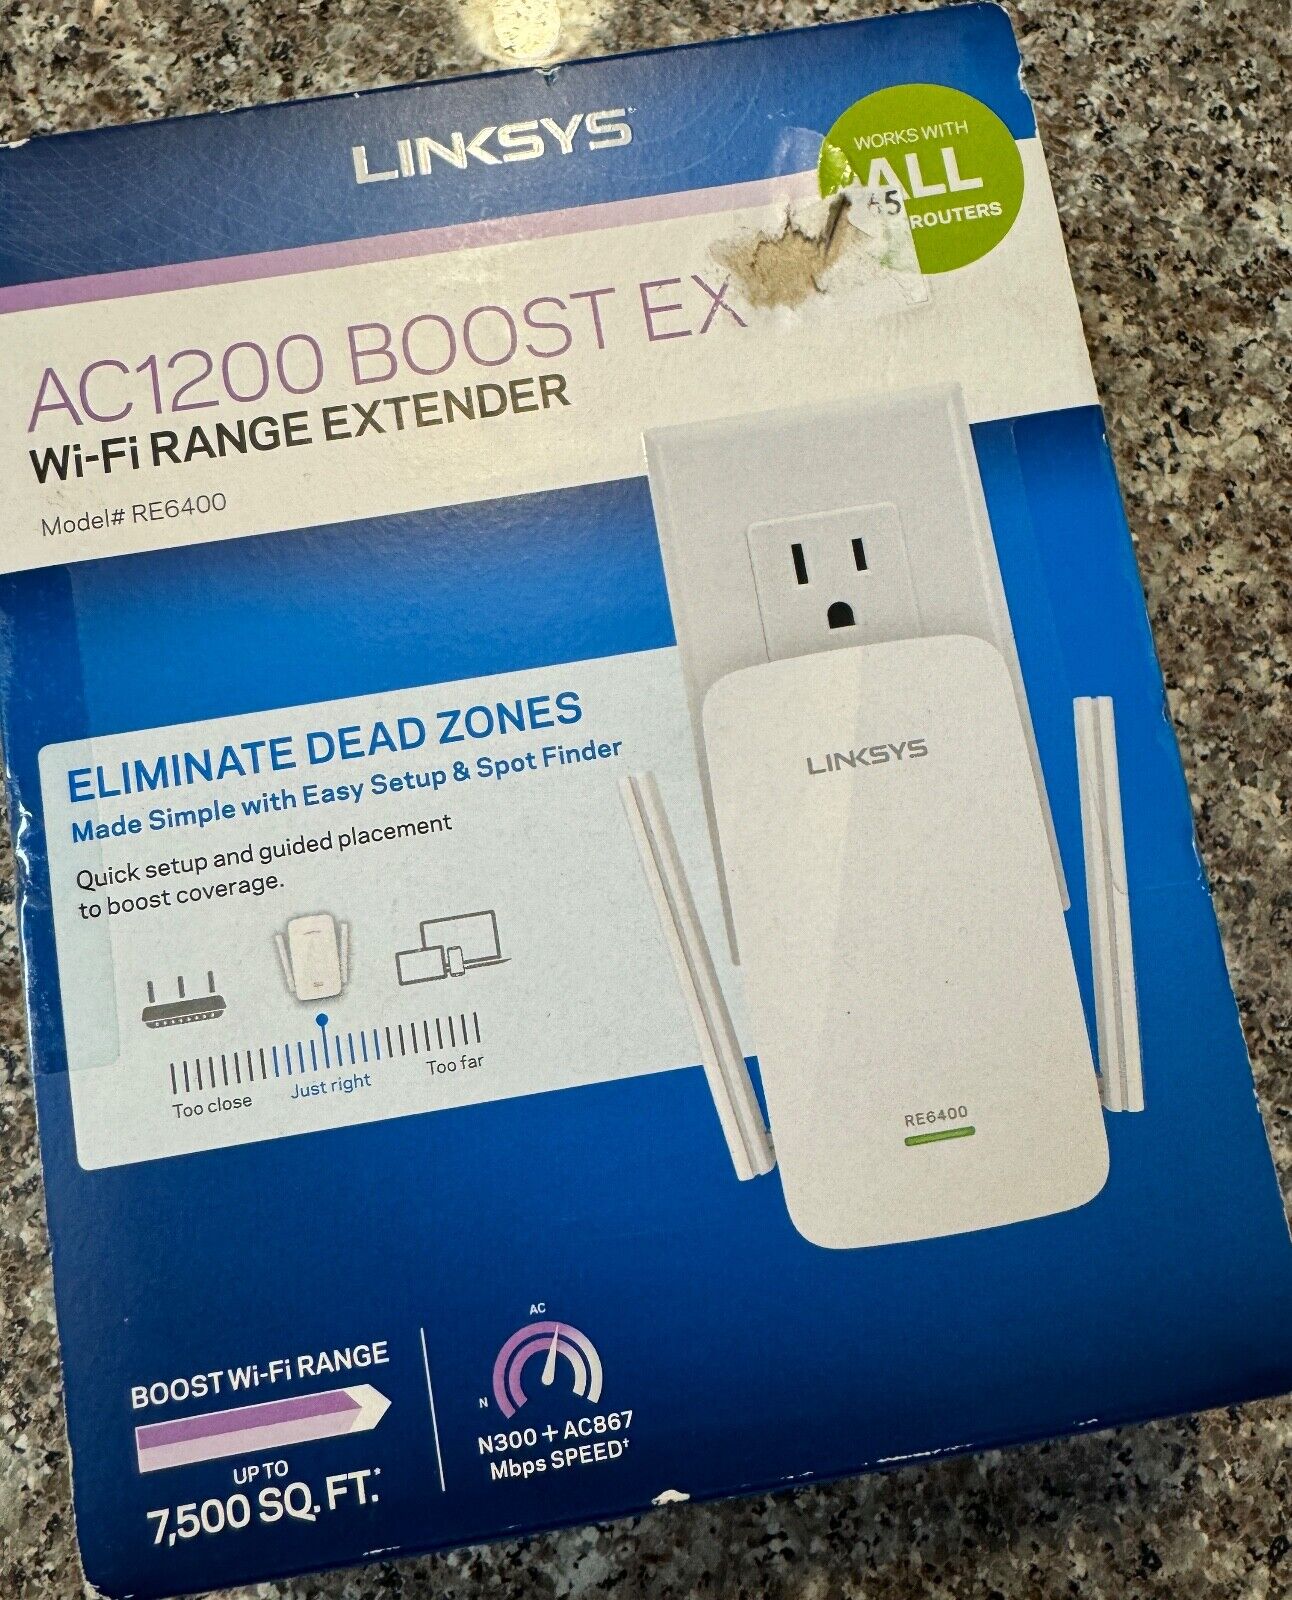 Linksys AC1200 Boost EX Dual-Band Wi-Fi Range Extender (RE6400) - NEW & SEALED